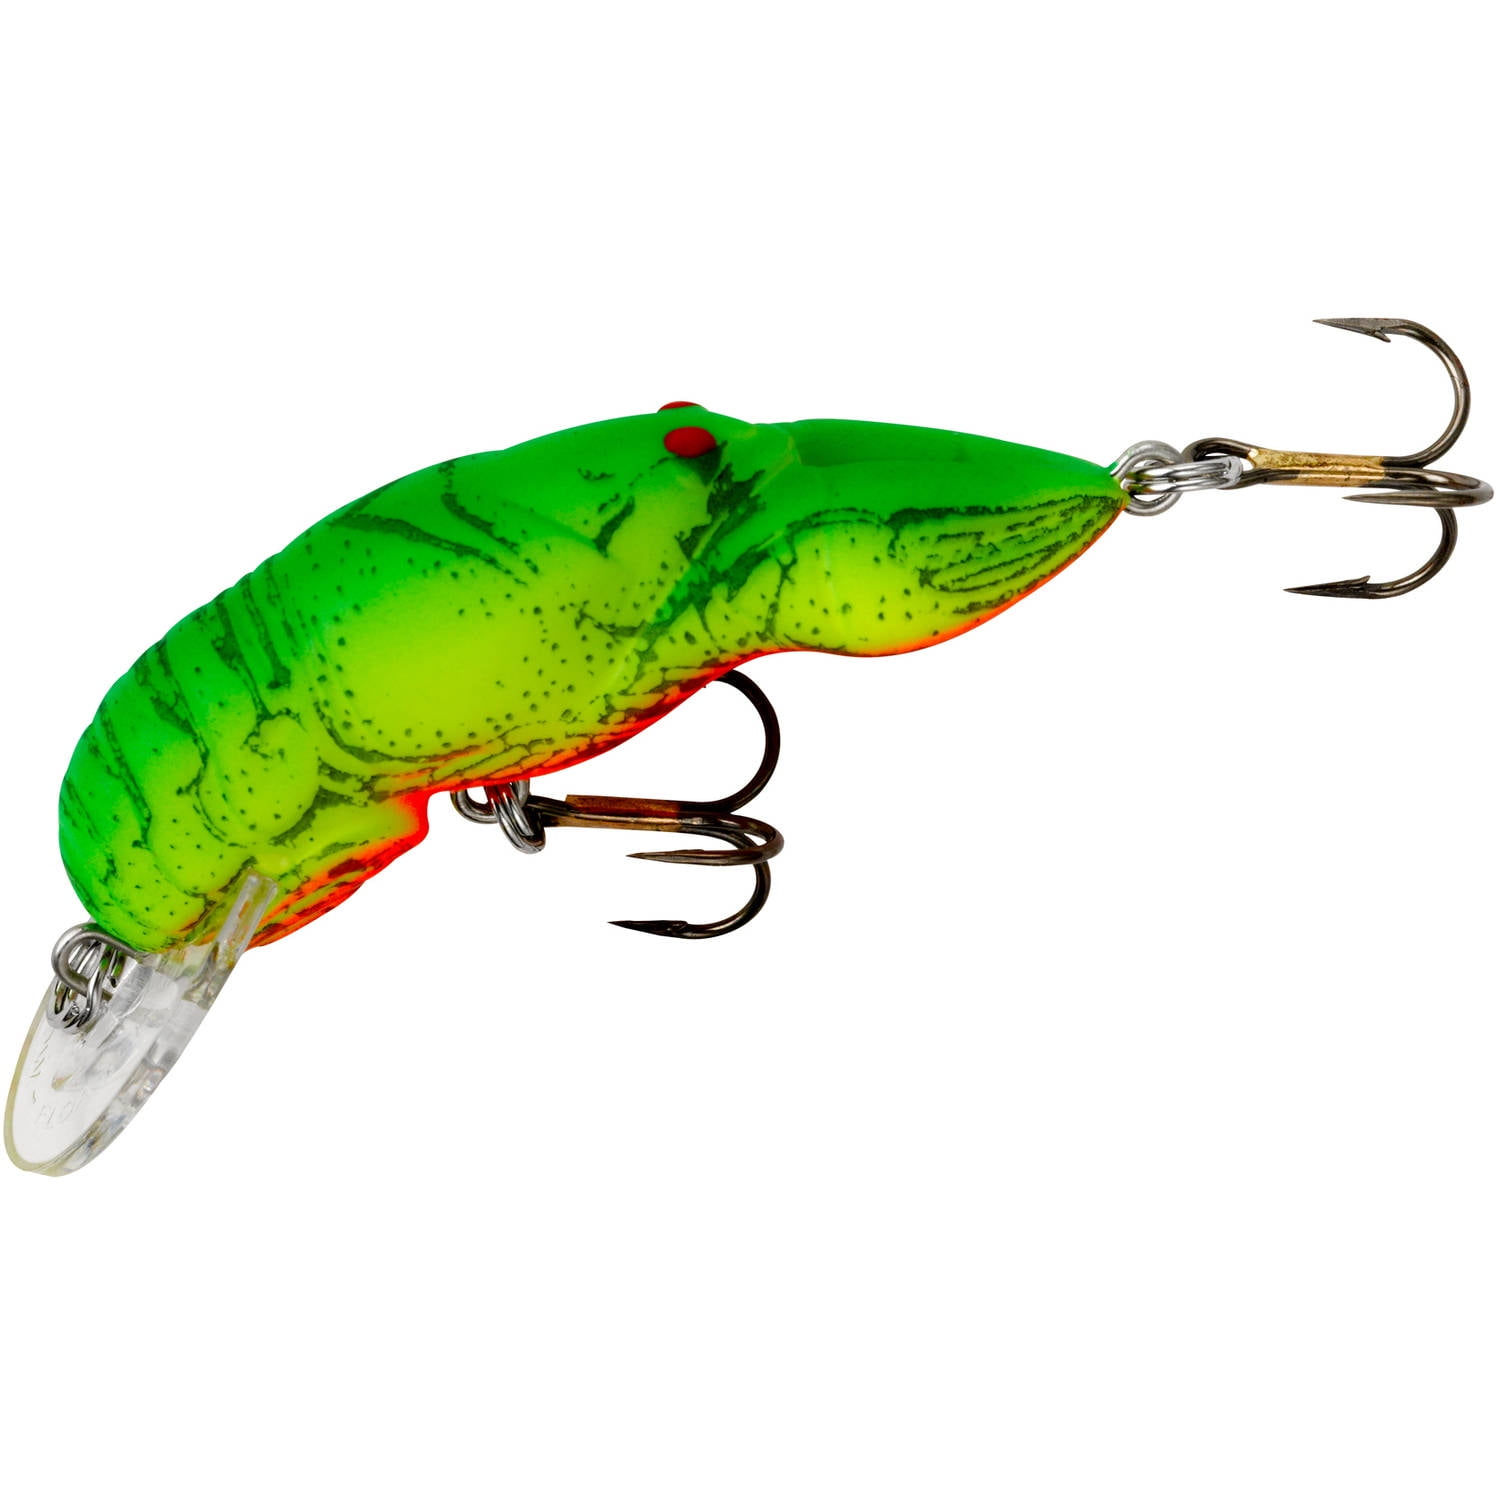 Rebel Wee Craw Fishing Lure Hard bait Chartreuse Green Back 2 in 1/5 oz 